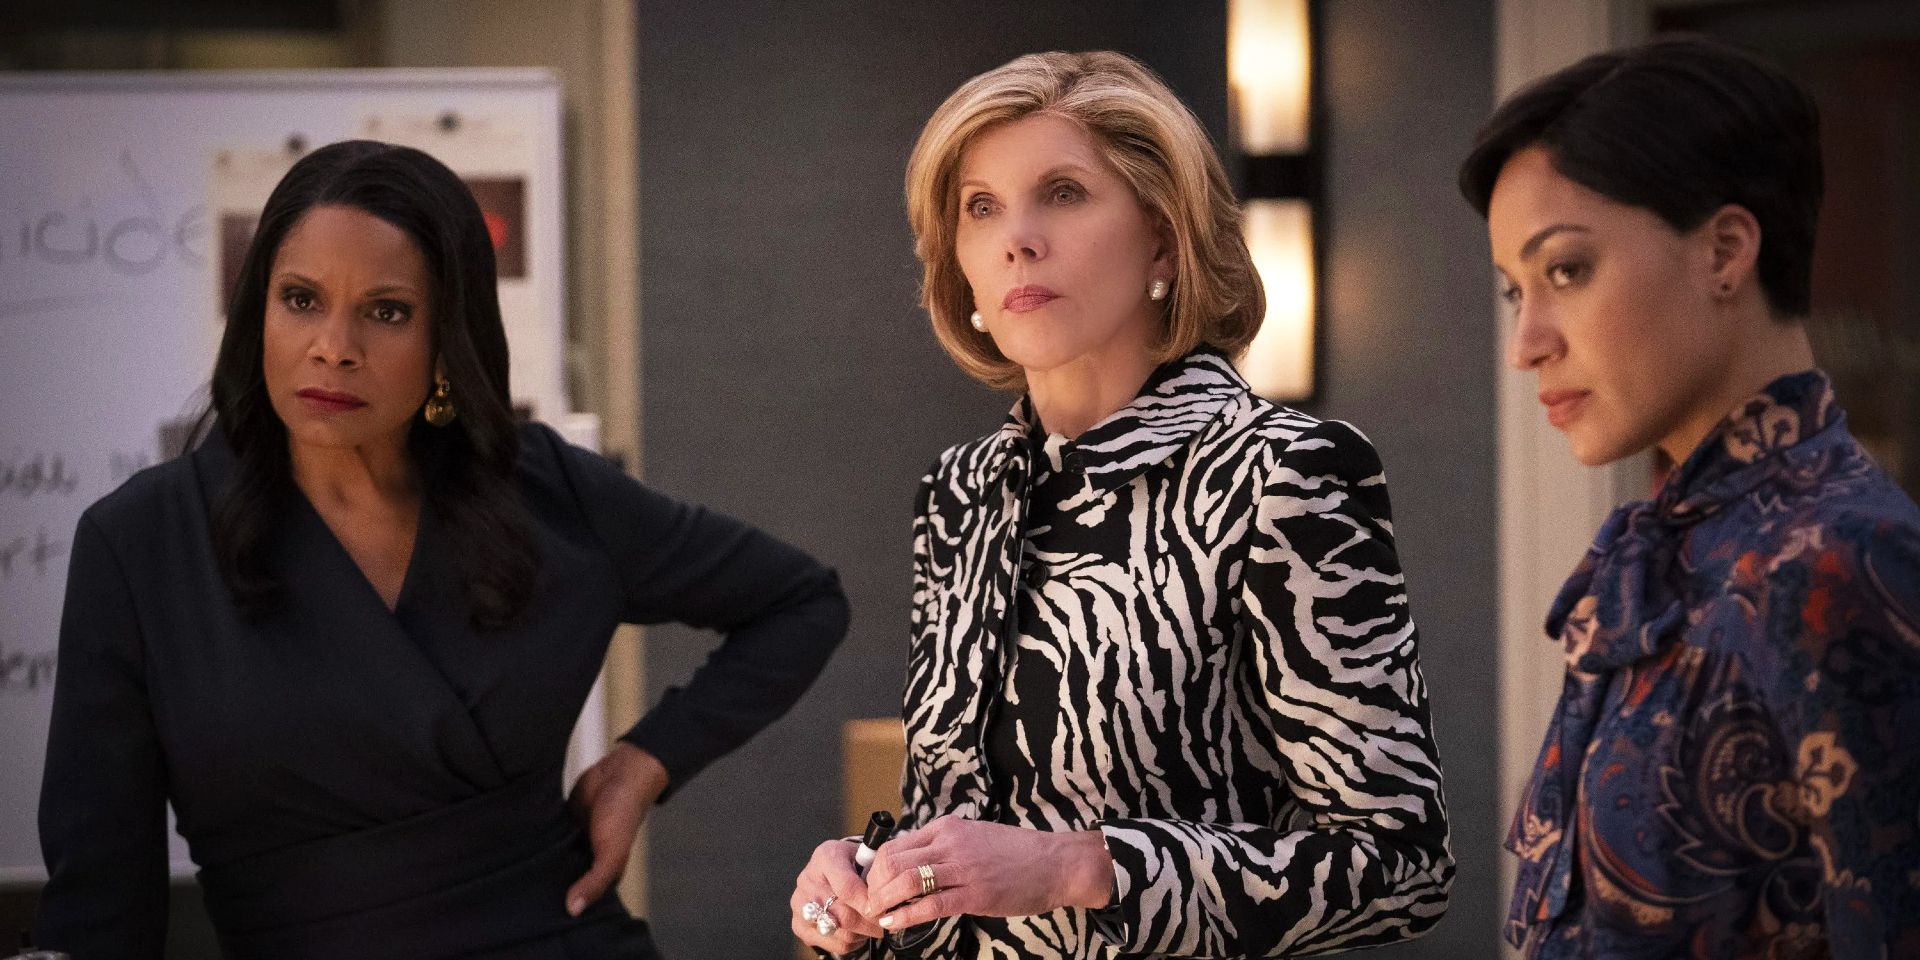 The Good Fight Season 6 Story Details Revealed